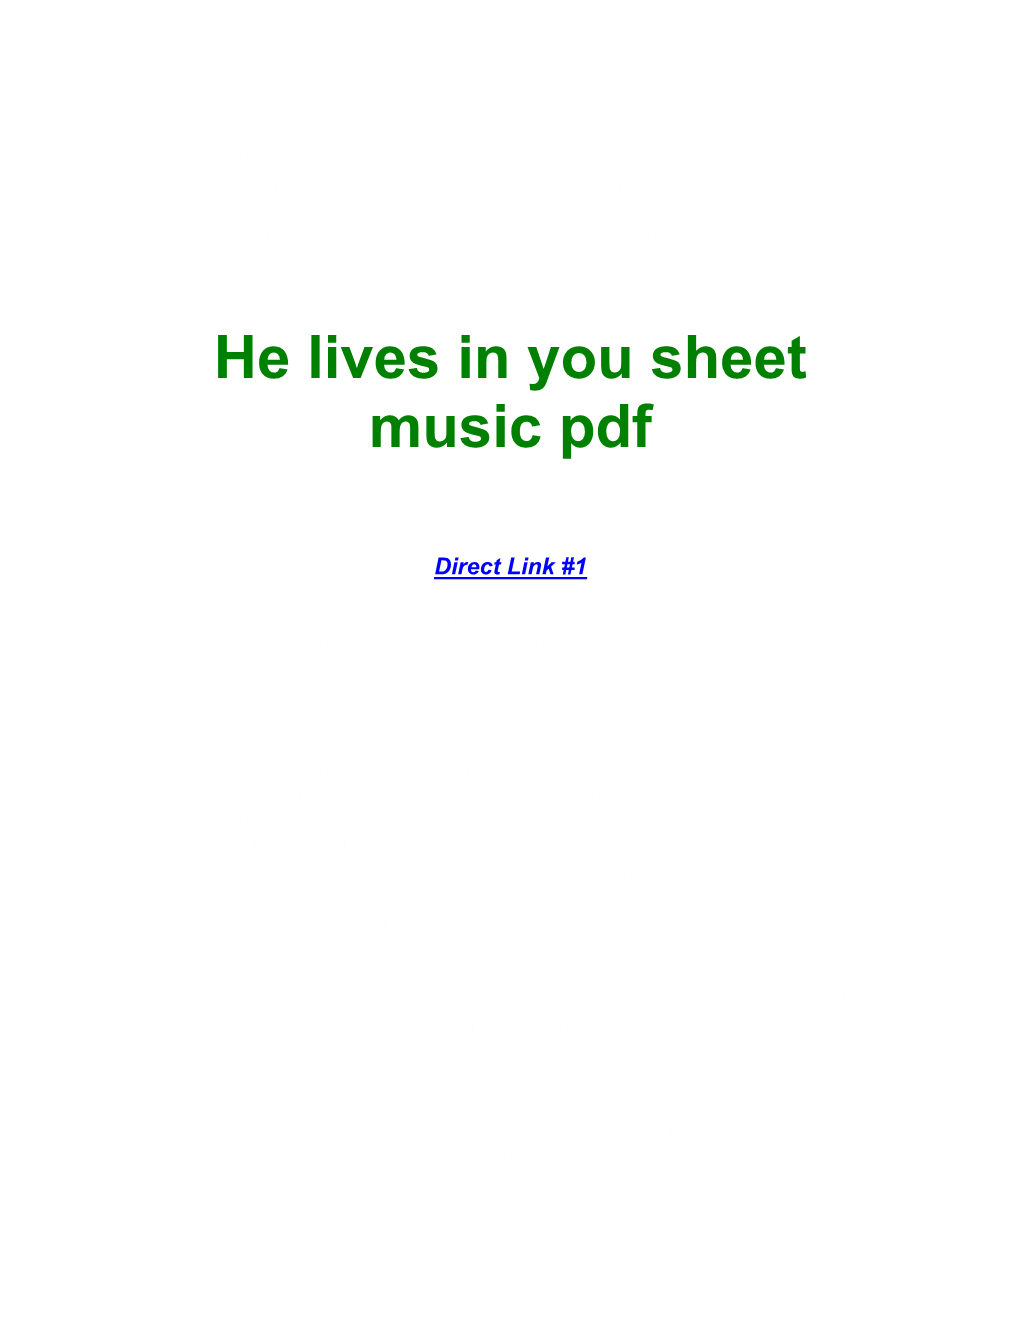 He Lives in You Sheet Music Pdf